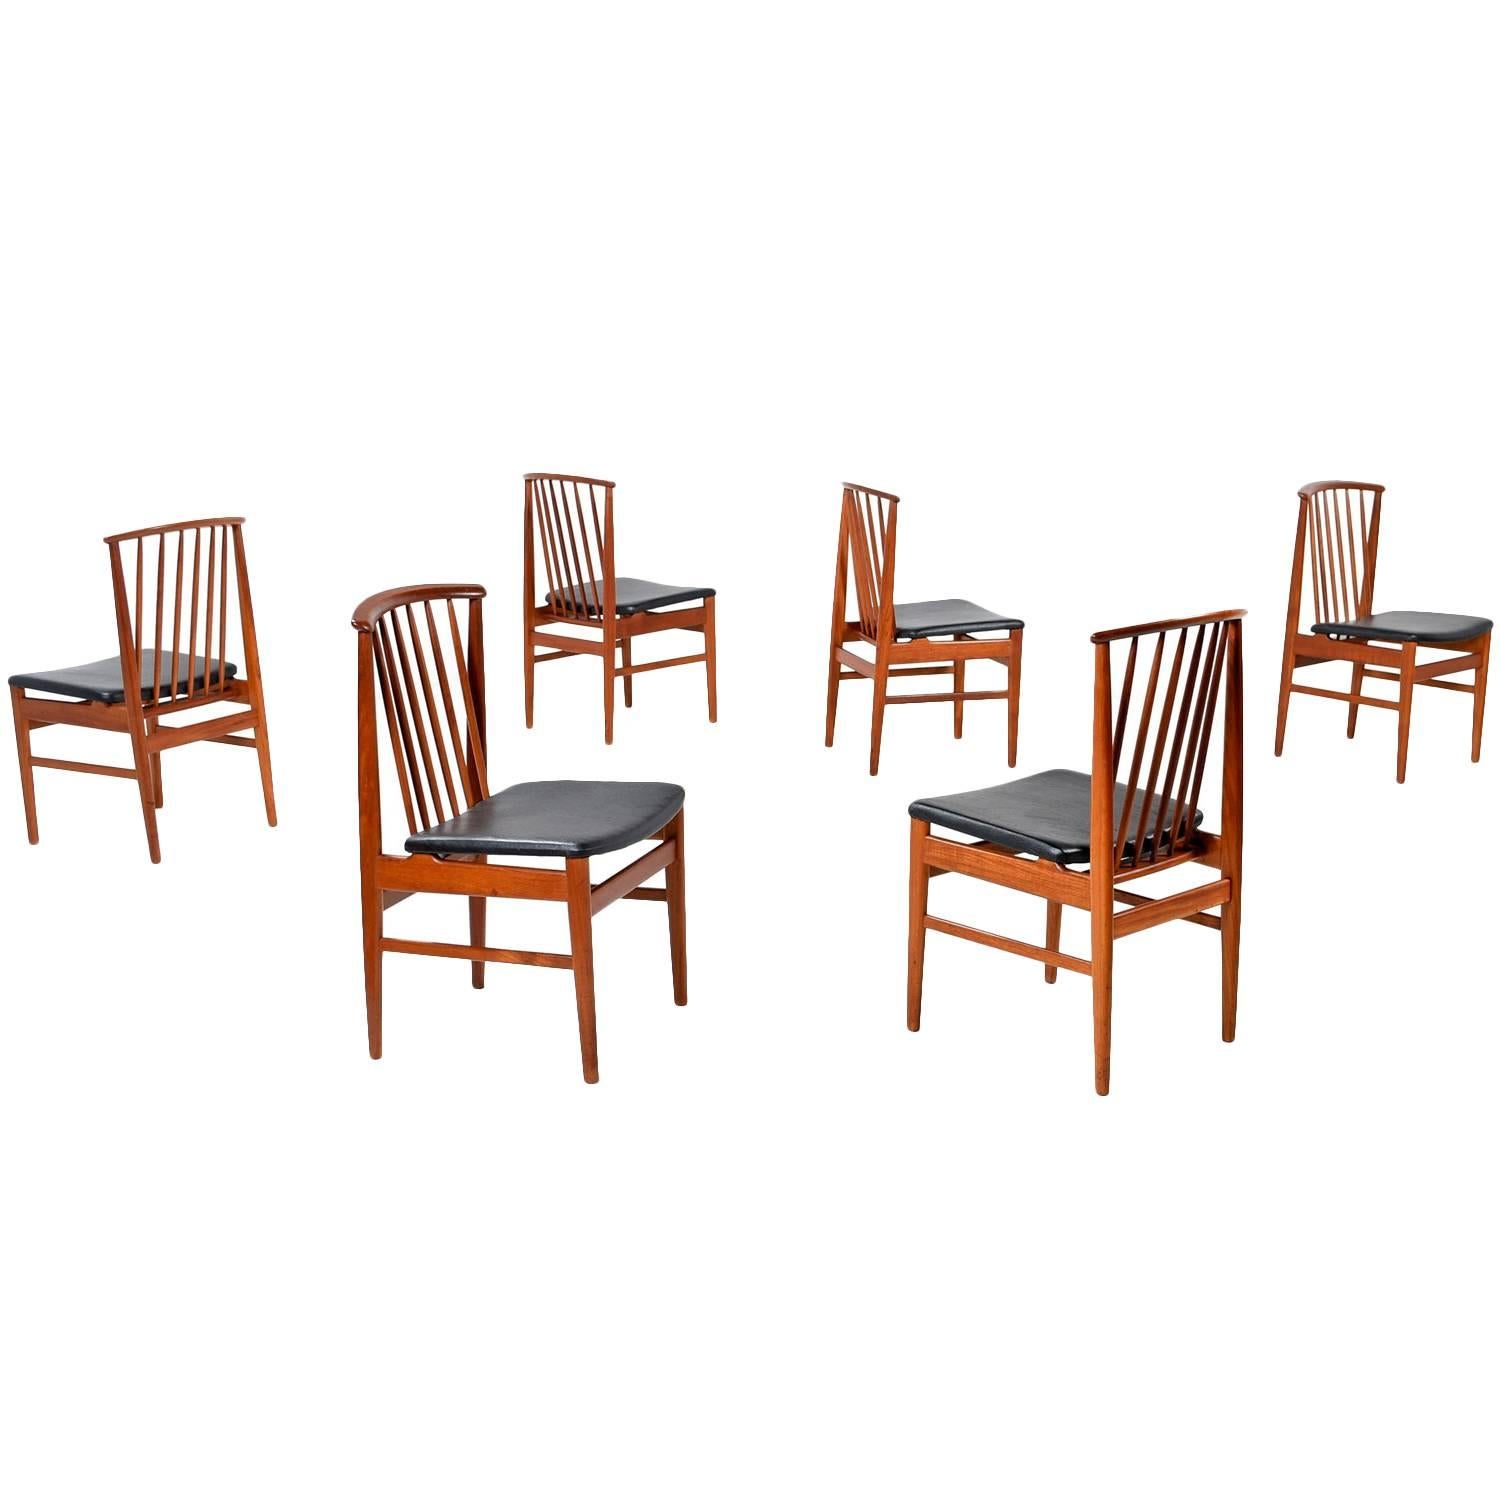 Set of 6 Mid-Century Modern Sylve Stenquist for DUX Teak Dining Chairs, 1950's